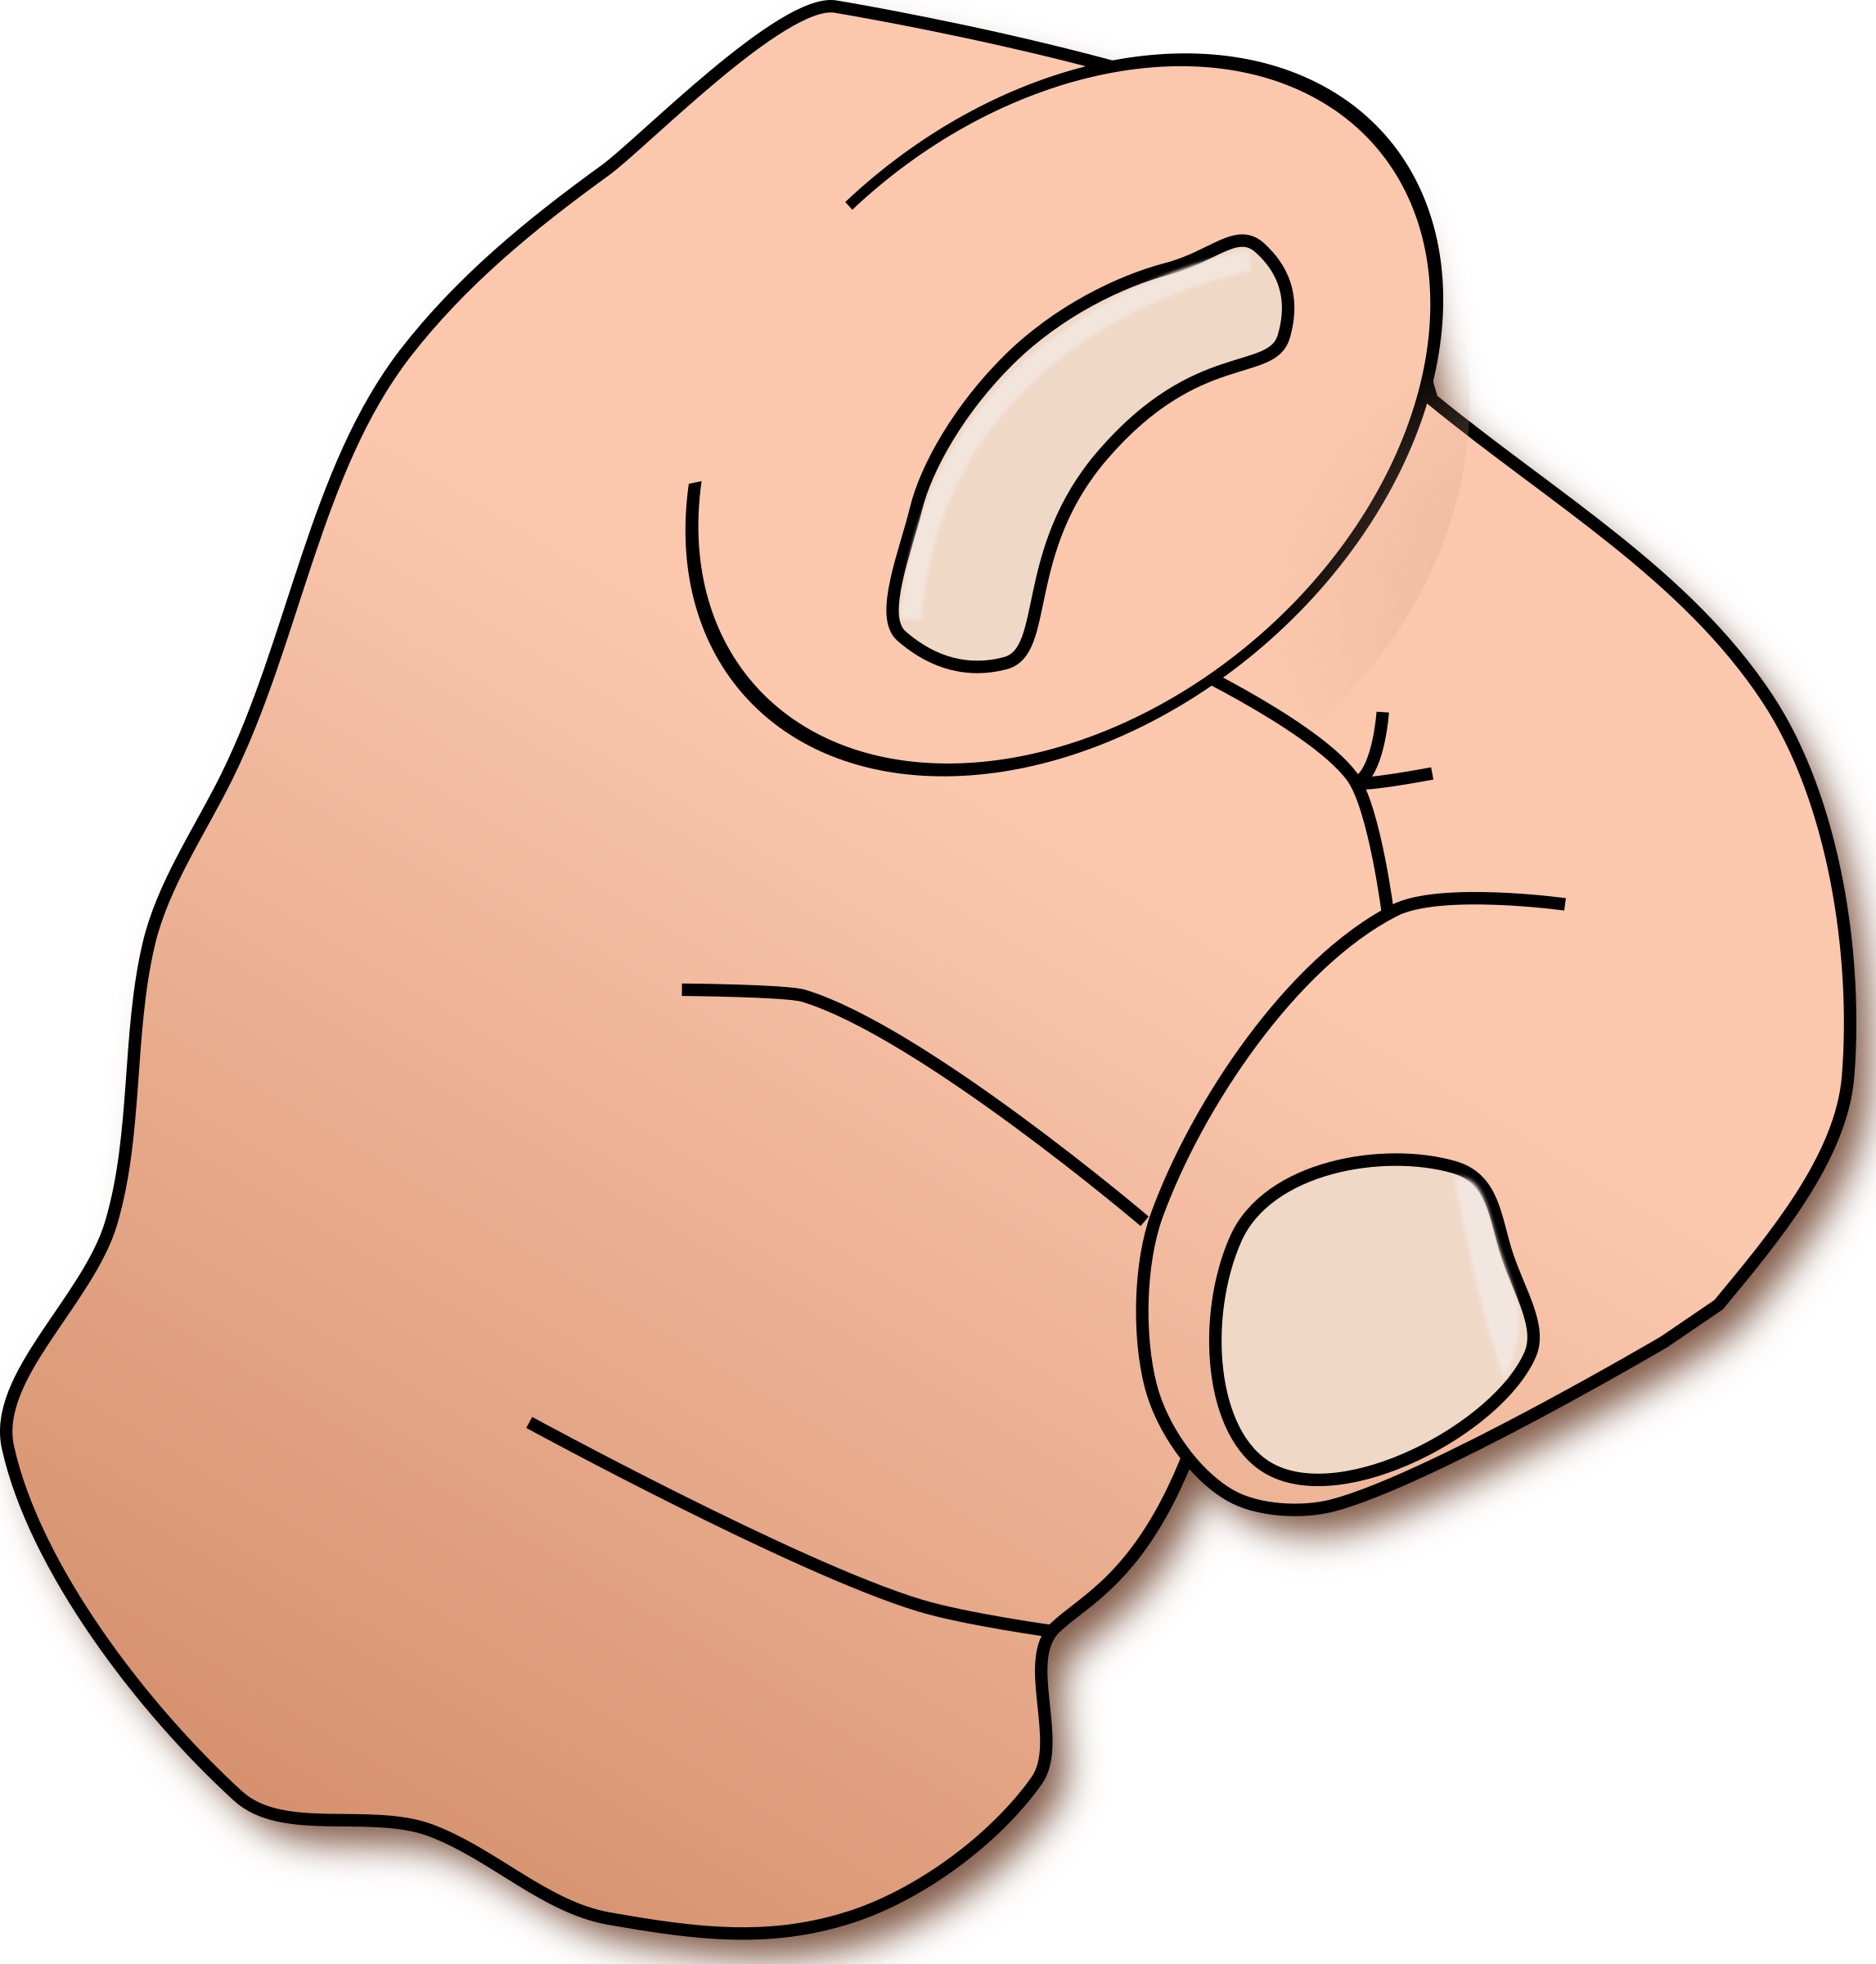 Finger big image png. Pointing clipart cartoon hand